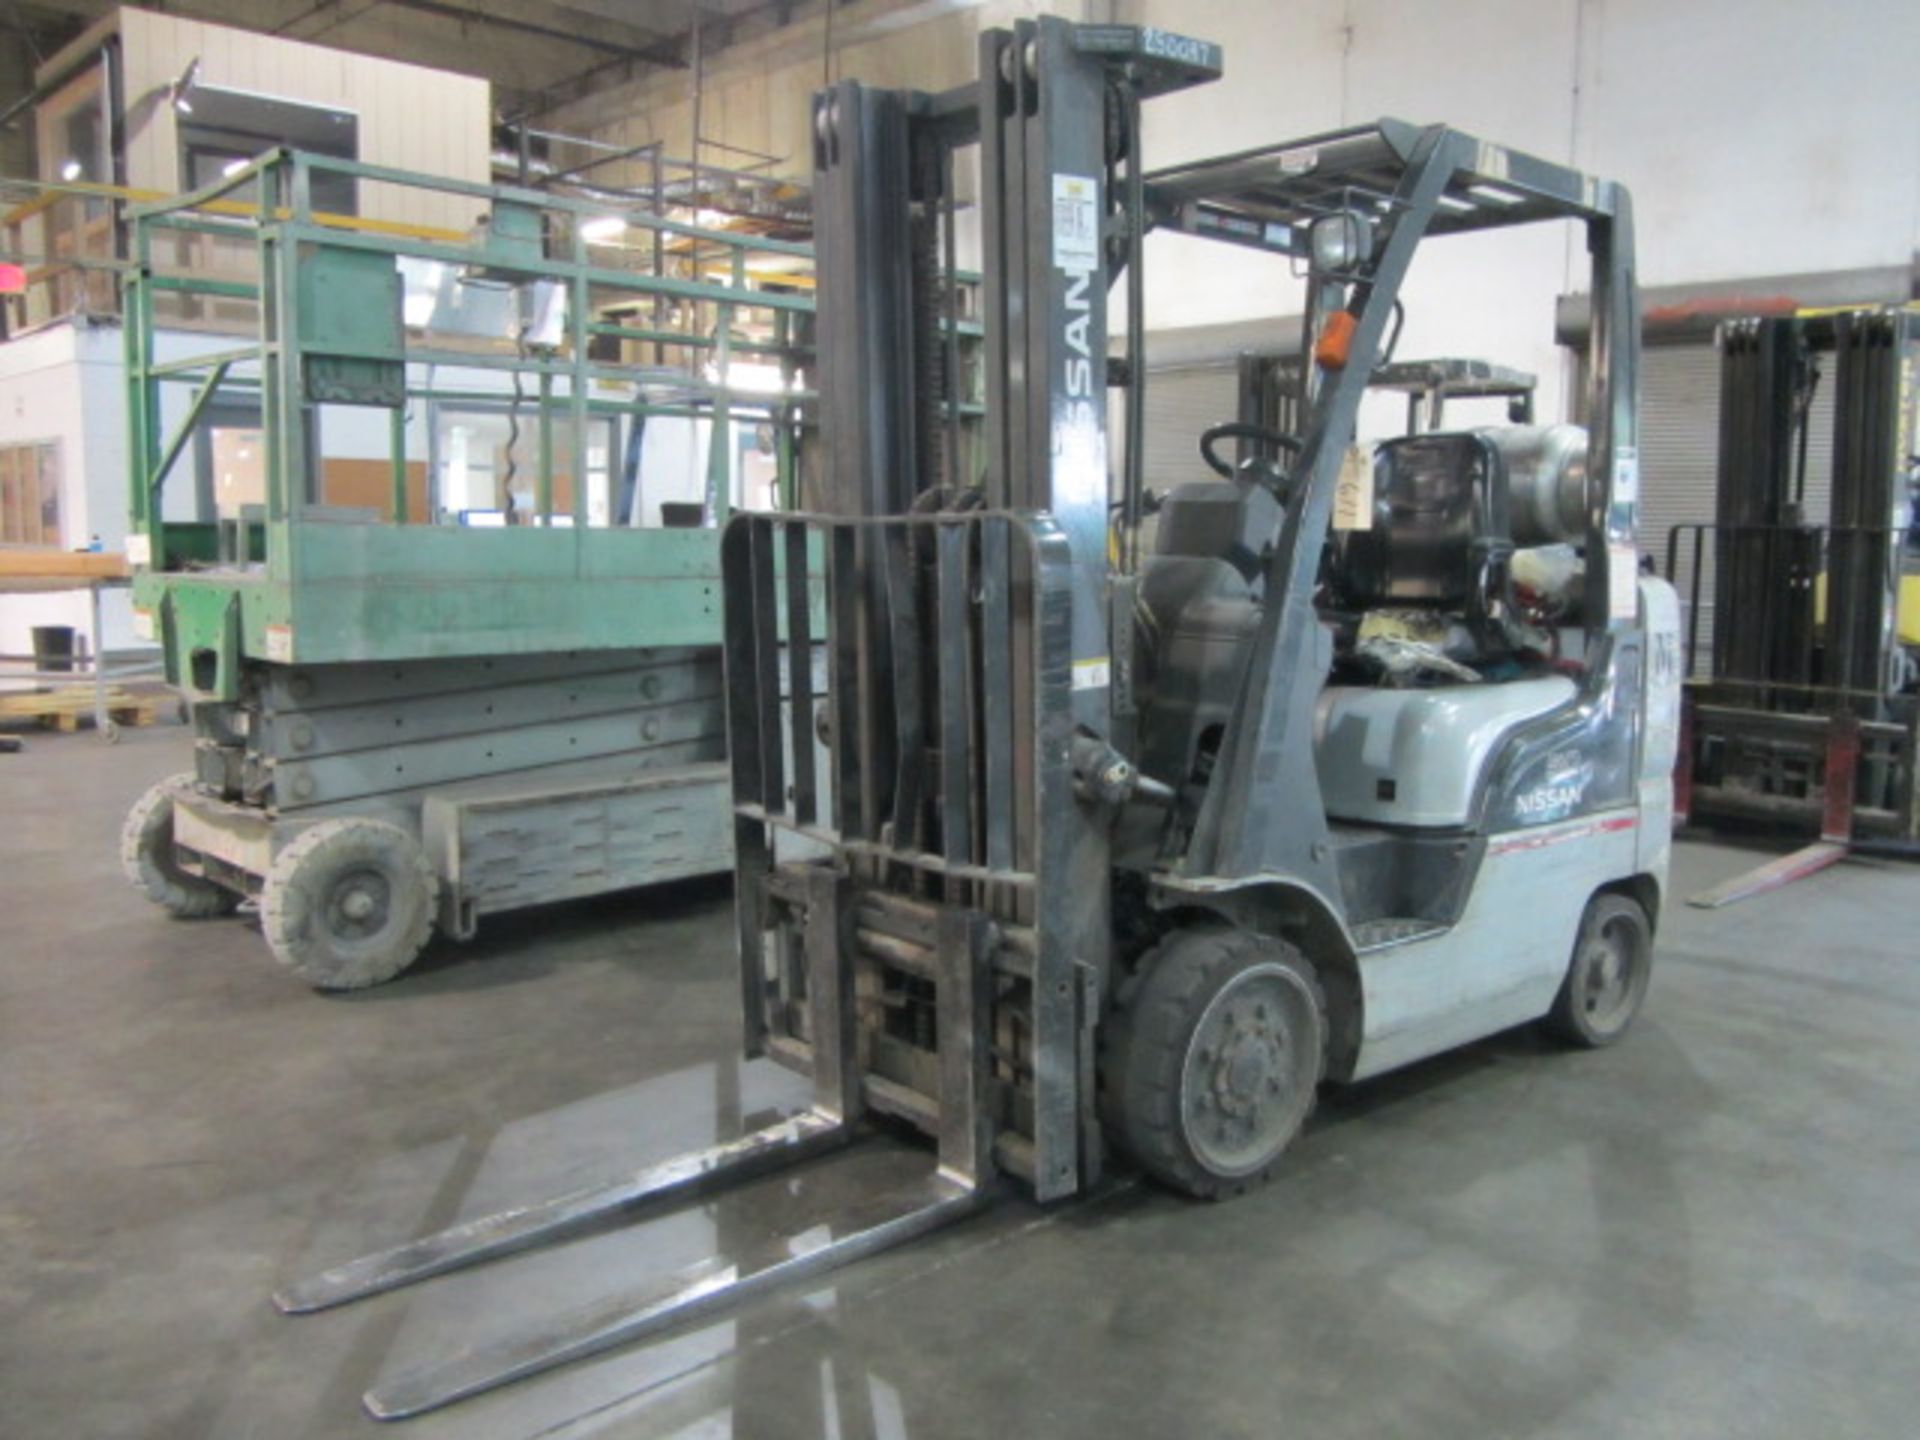 Nissan 50 4400lb Propane Forklift with 3-Stage Mast, Sideshift, sn:CPL02-9P2424 - Image 5 of 7